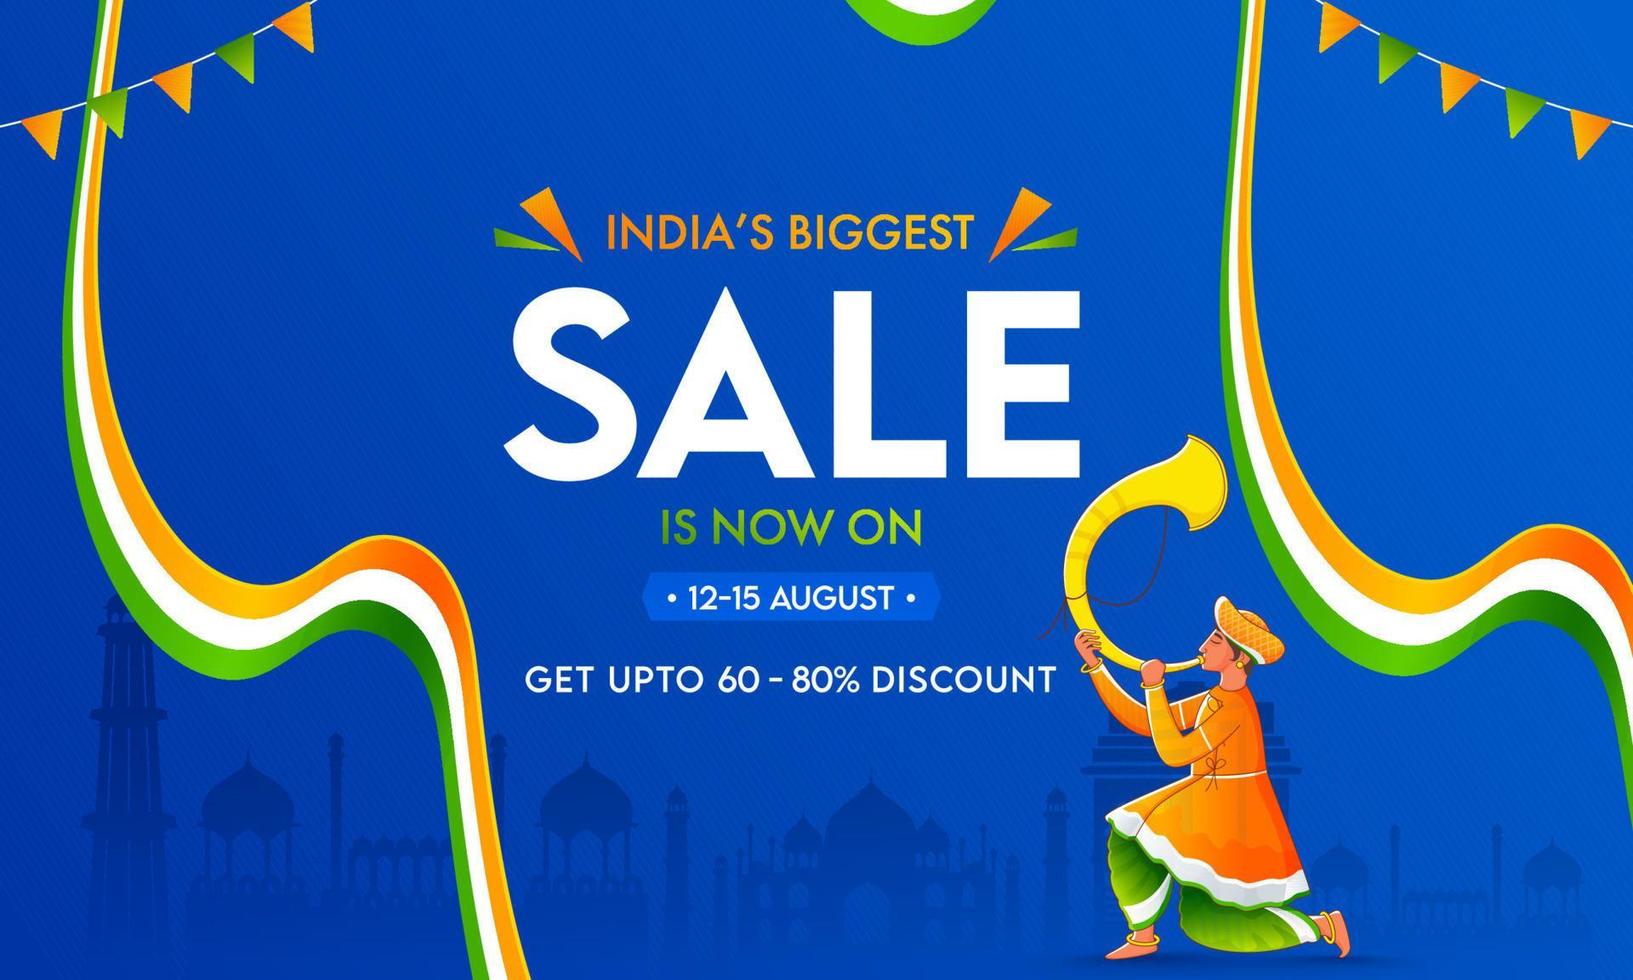 India's Biggest Sale Banner Design with Discount Offer, Tutari Player and Indian Wavy Ribbon on Blue Famous Monuments Background. vector